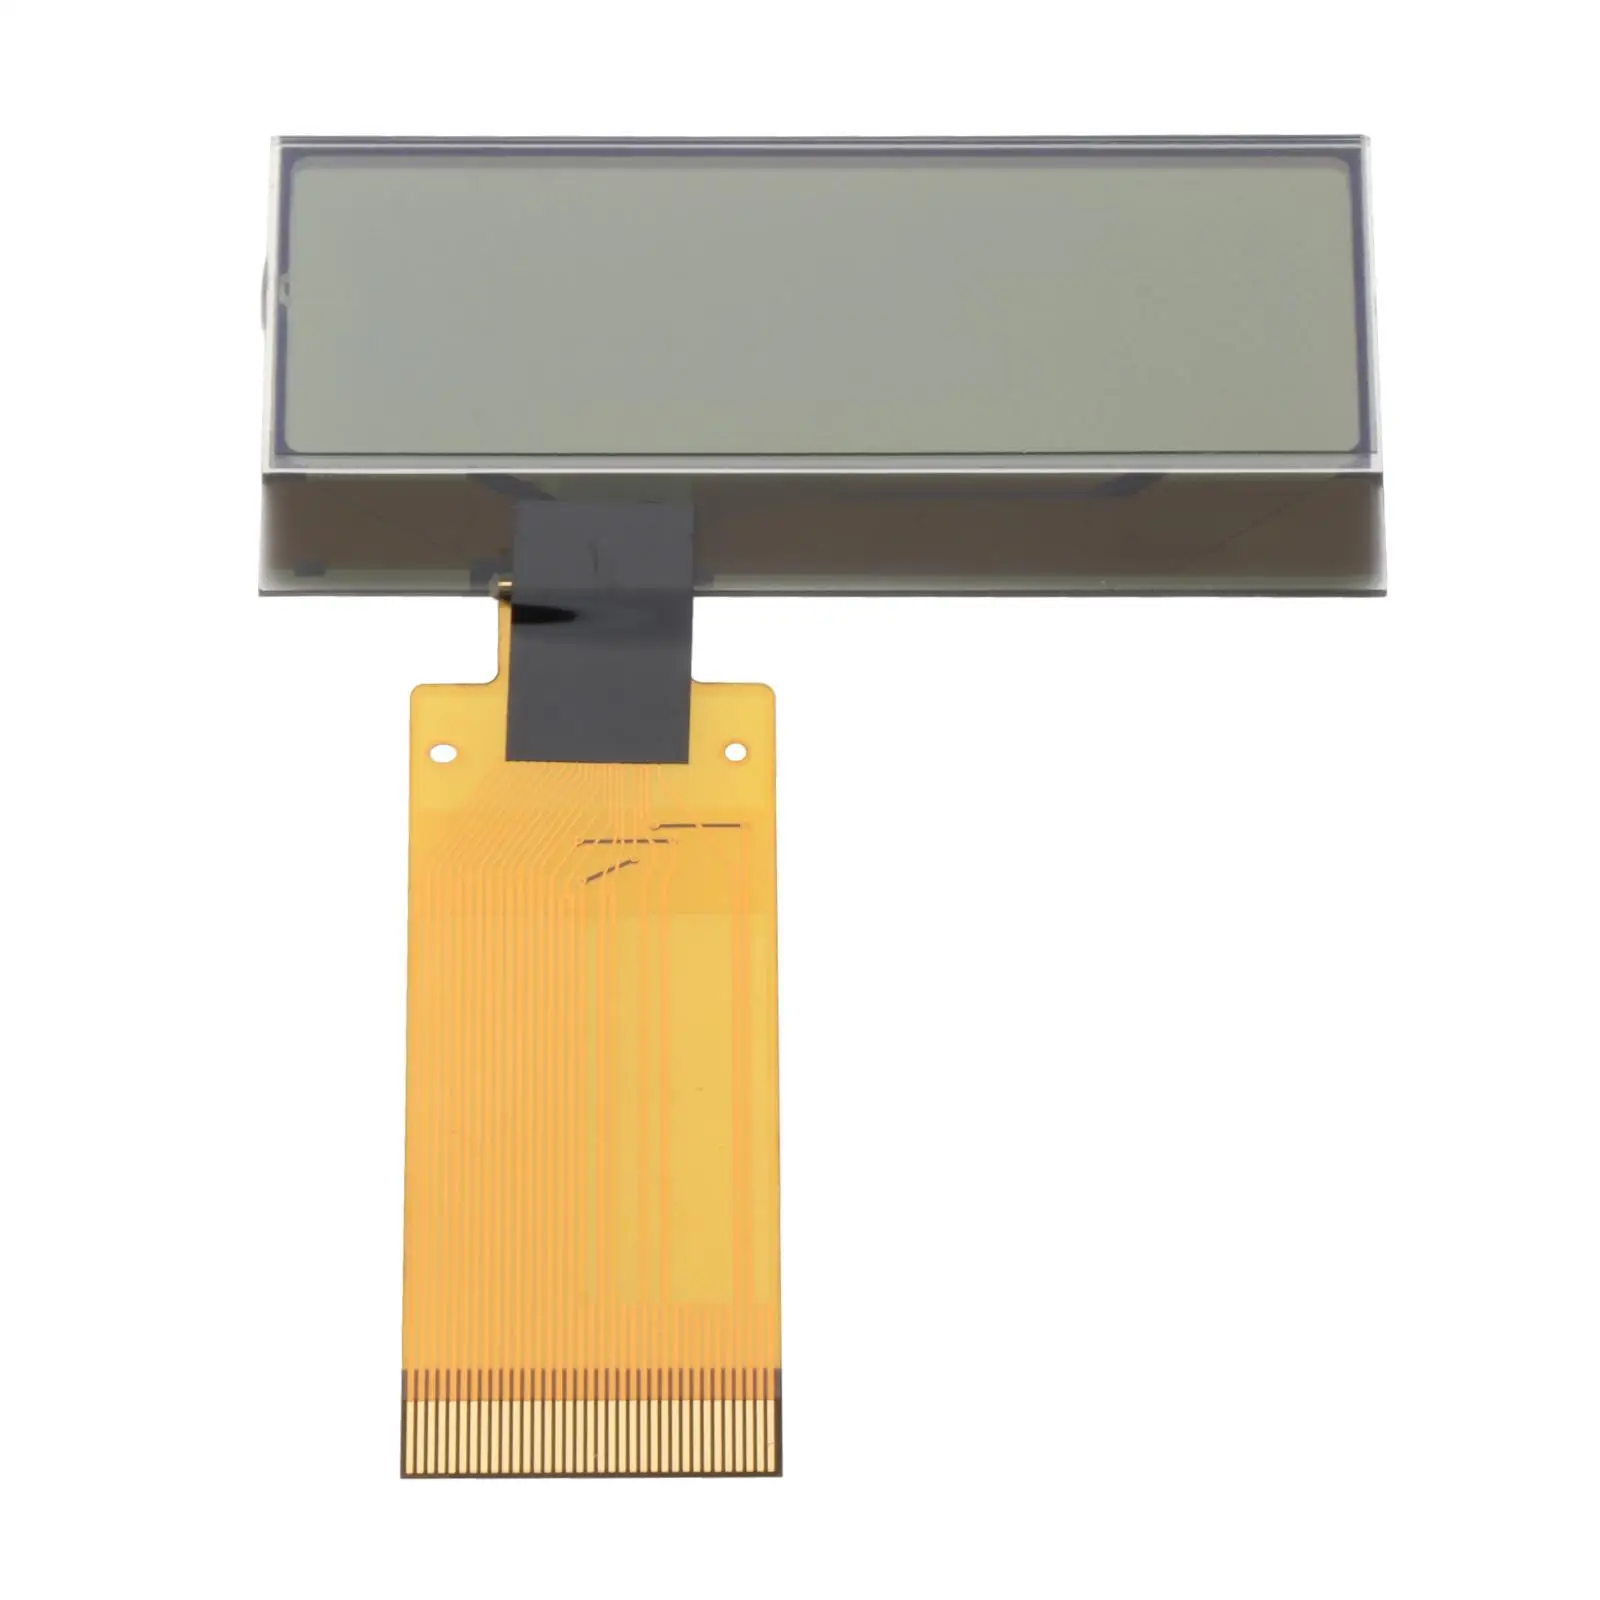 LCD Display 79-8M0062382 79- 8M0059084 Fits for